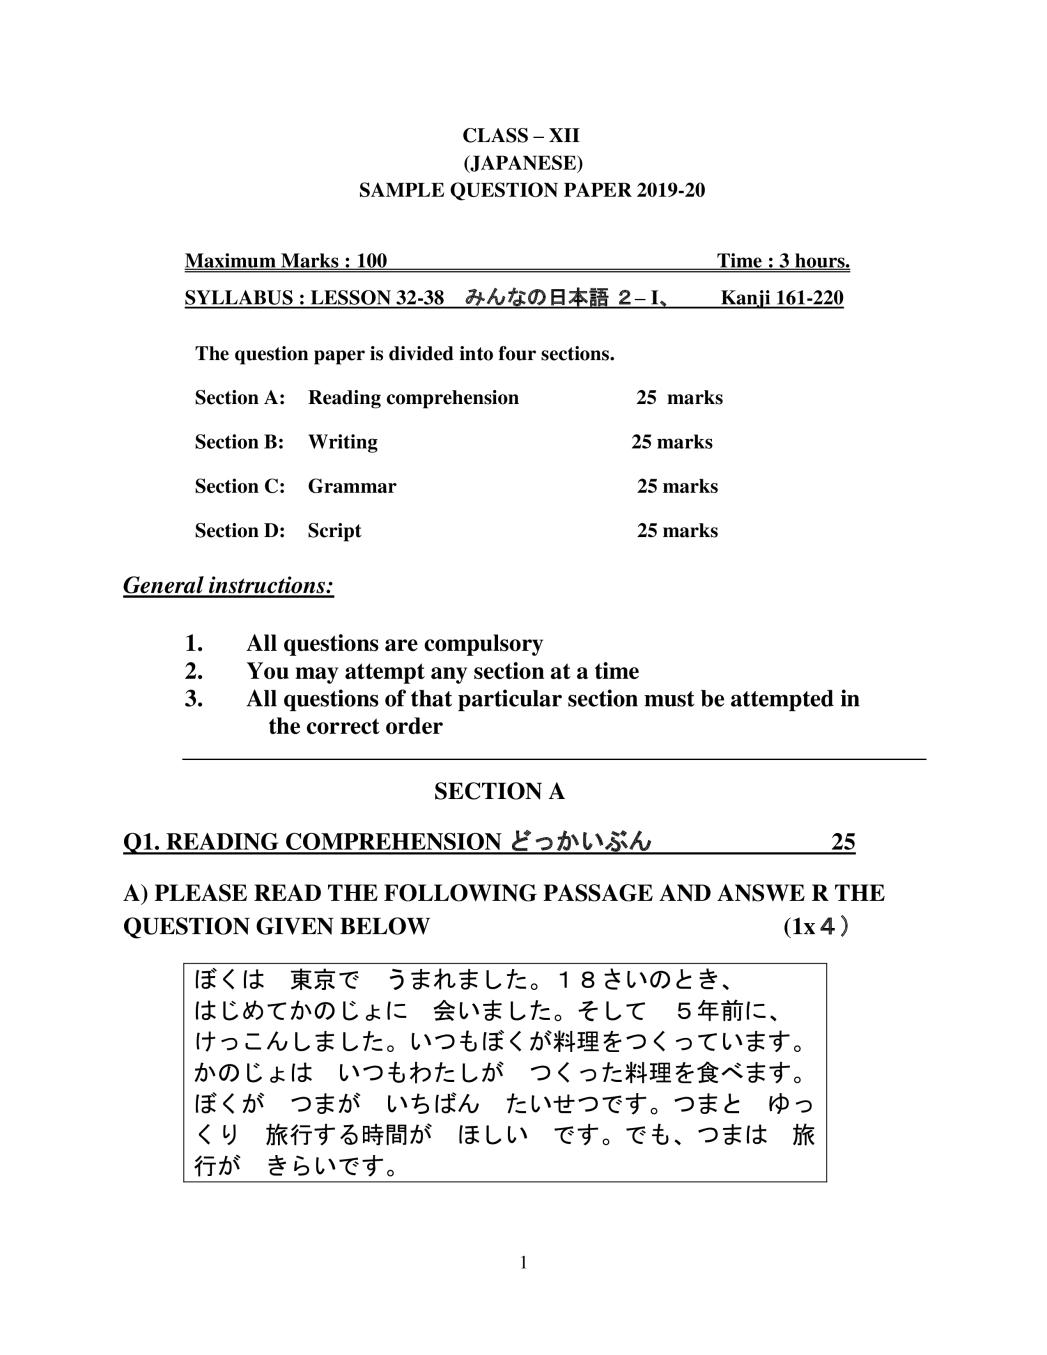 CBSE Class 12 Sample Paper 2020 for Japanese - Page 1